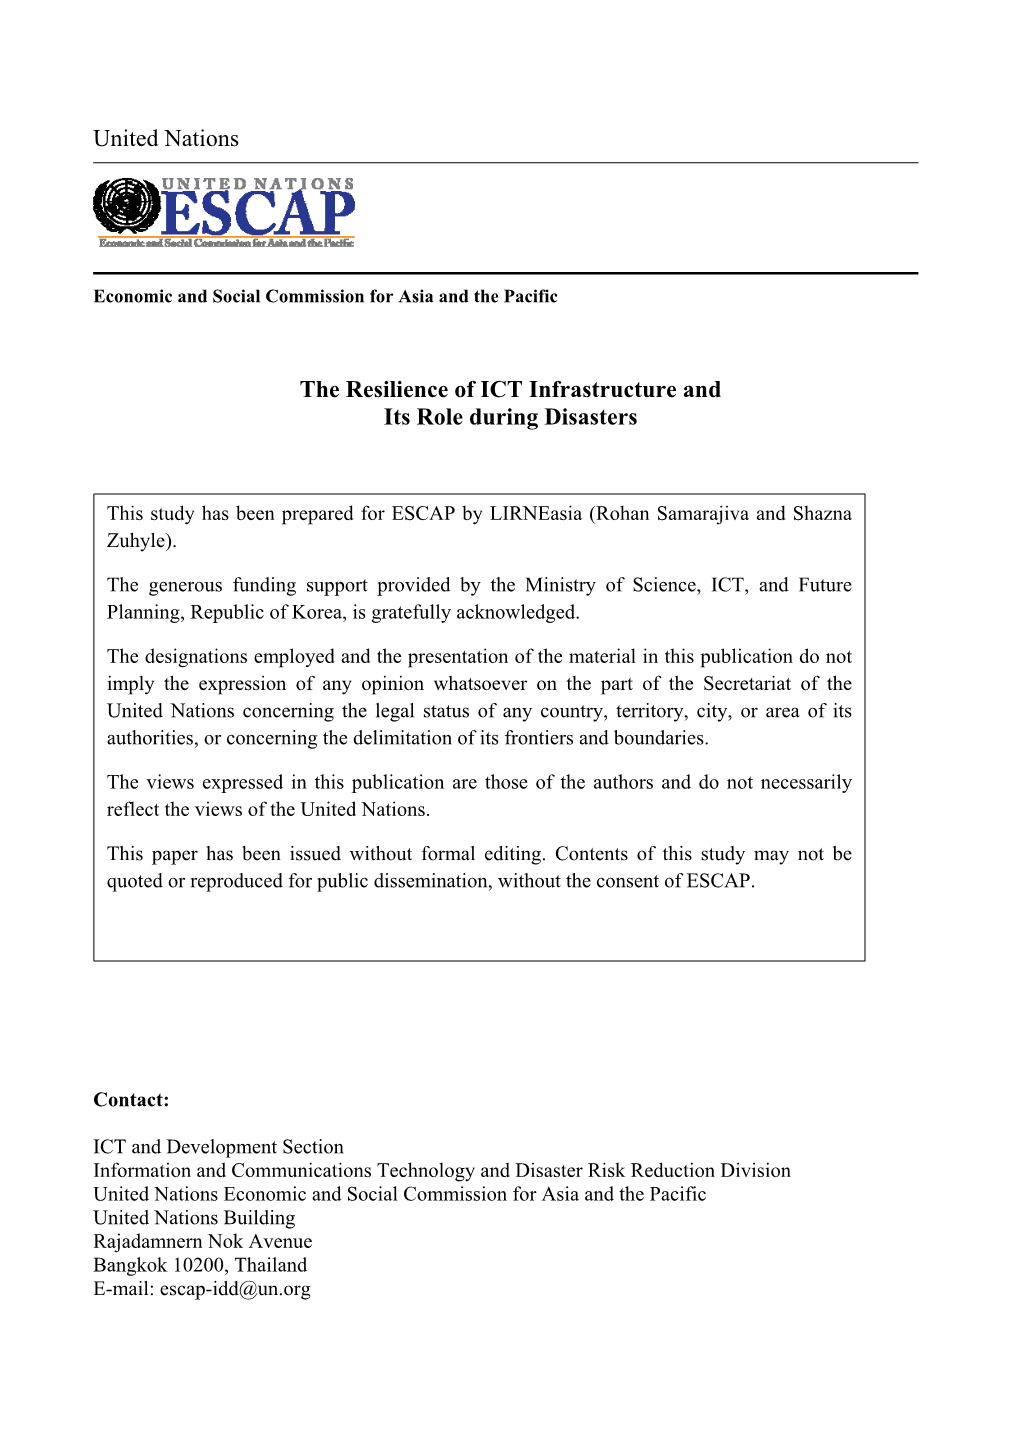 The Resilience of ICT Infrastructure and Its Role During Disasters United Nations